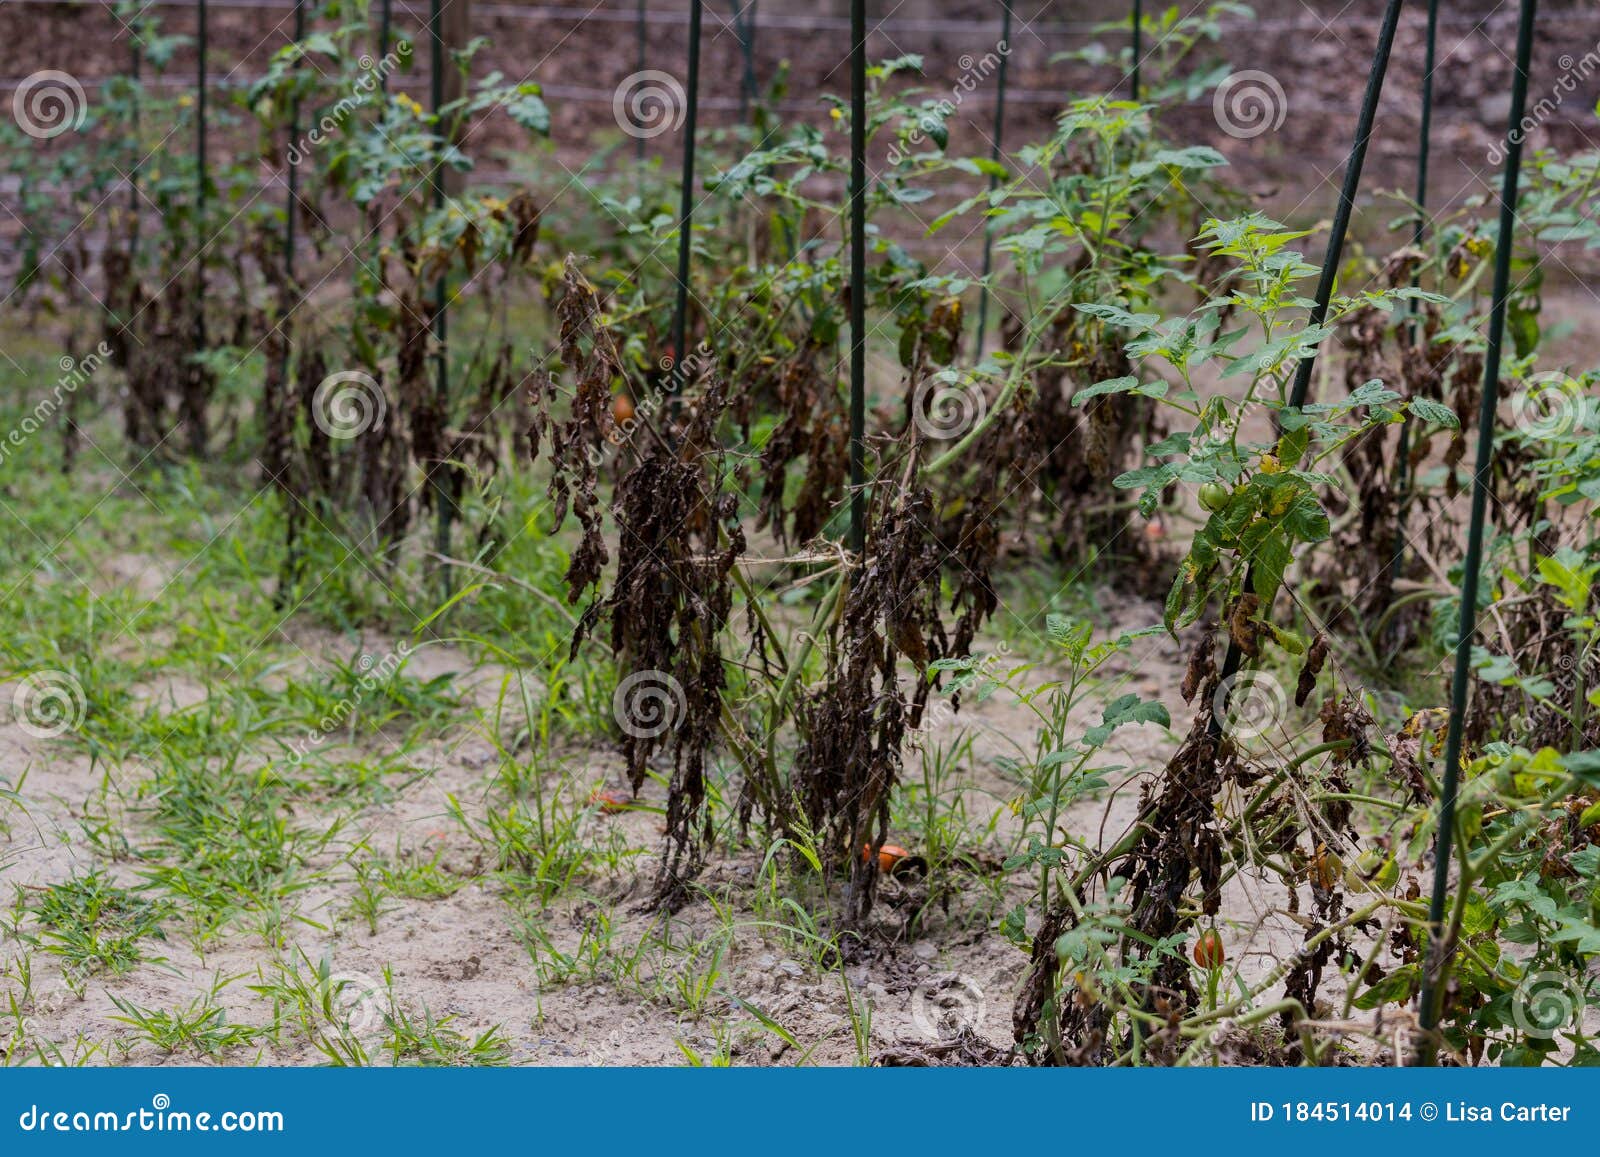 Dry plants from drought in the garden. The dried bush of a tomato. The plant  withered from lack of water. World Drought. wilted pot plant. drought. dried  plants Stock Photo